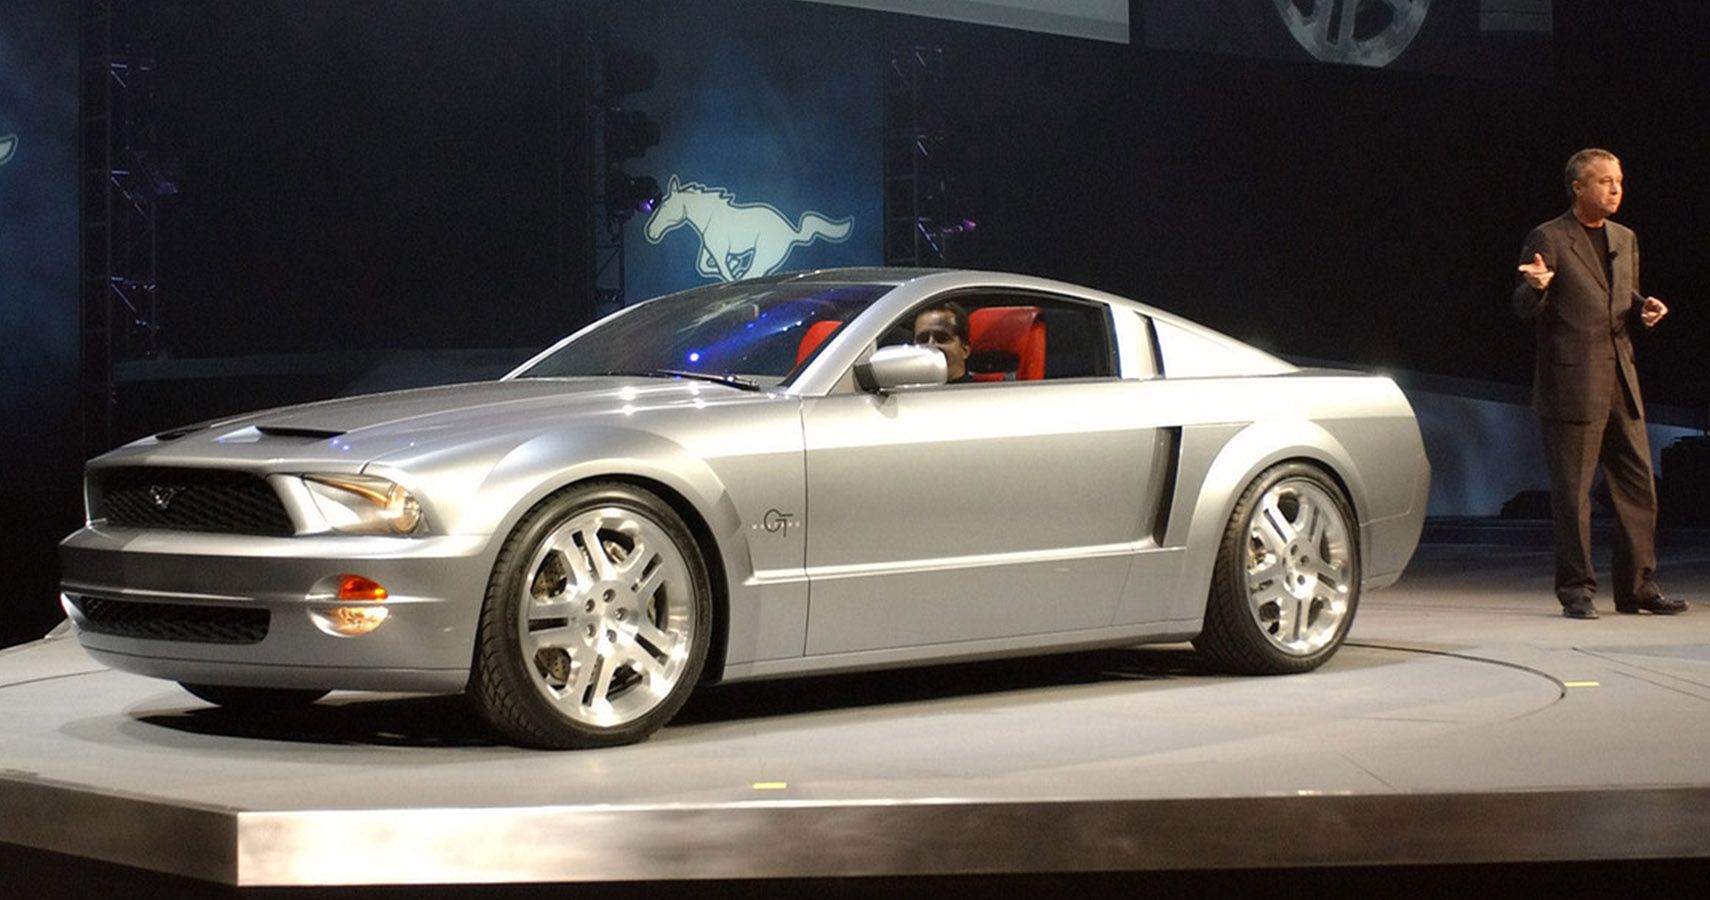 2005 Ford Mustang GT Concept: The Menace Is Lost